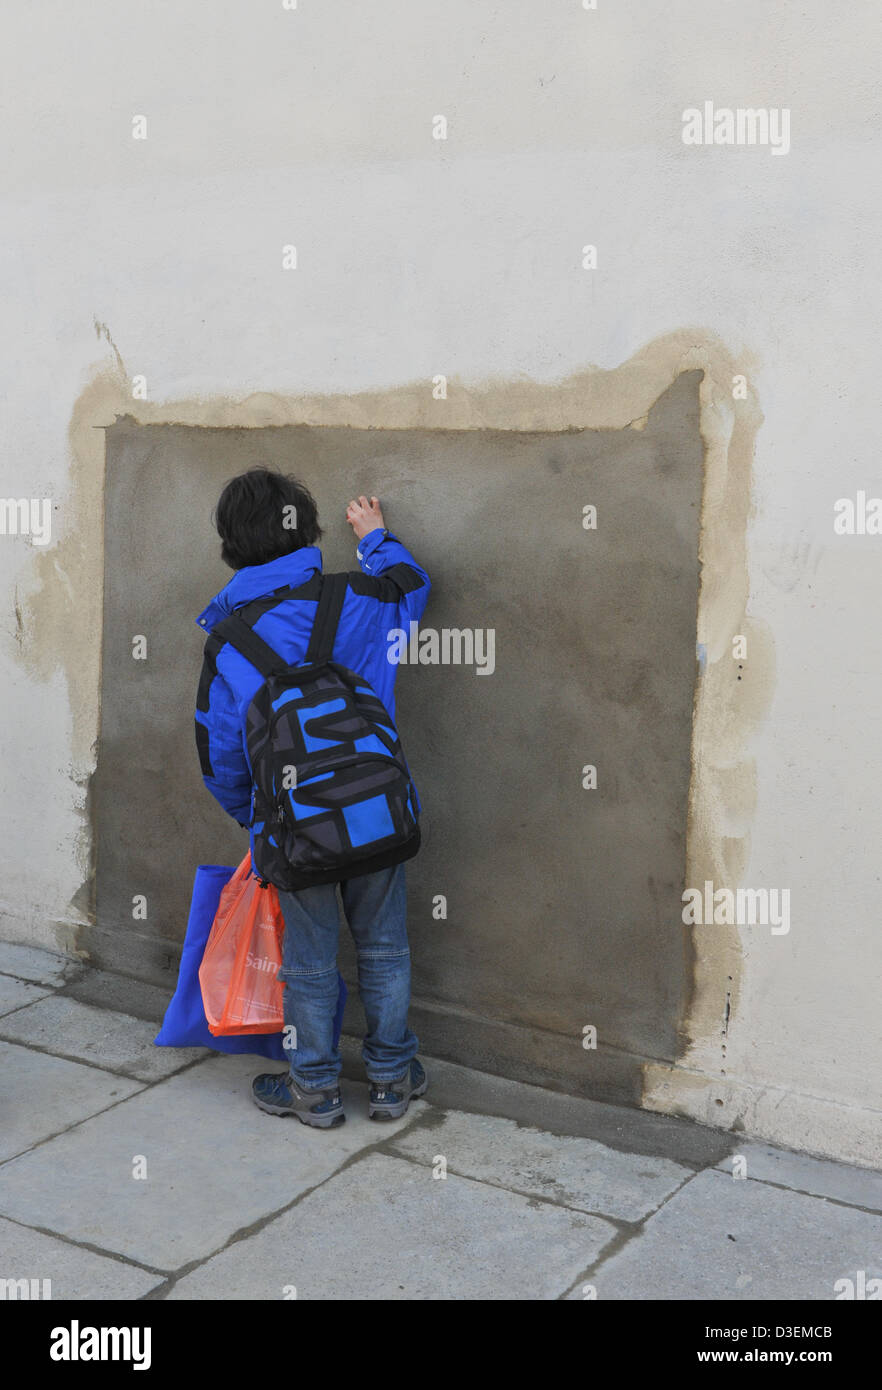 Wood Green, London, UK. 18th February 2013. A boy looks at the cemented up hole where the Banksy artwork was.The Banksy picture of a boy with Union Jack bunting has been removed and is now on sale on an American auction site and is estimated to be worth $500,000-$700,000. Credit: Matthew Chattle/Alamy Live News Stock Photo